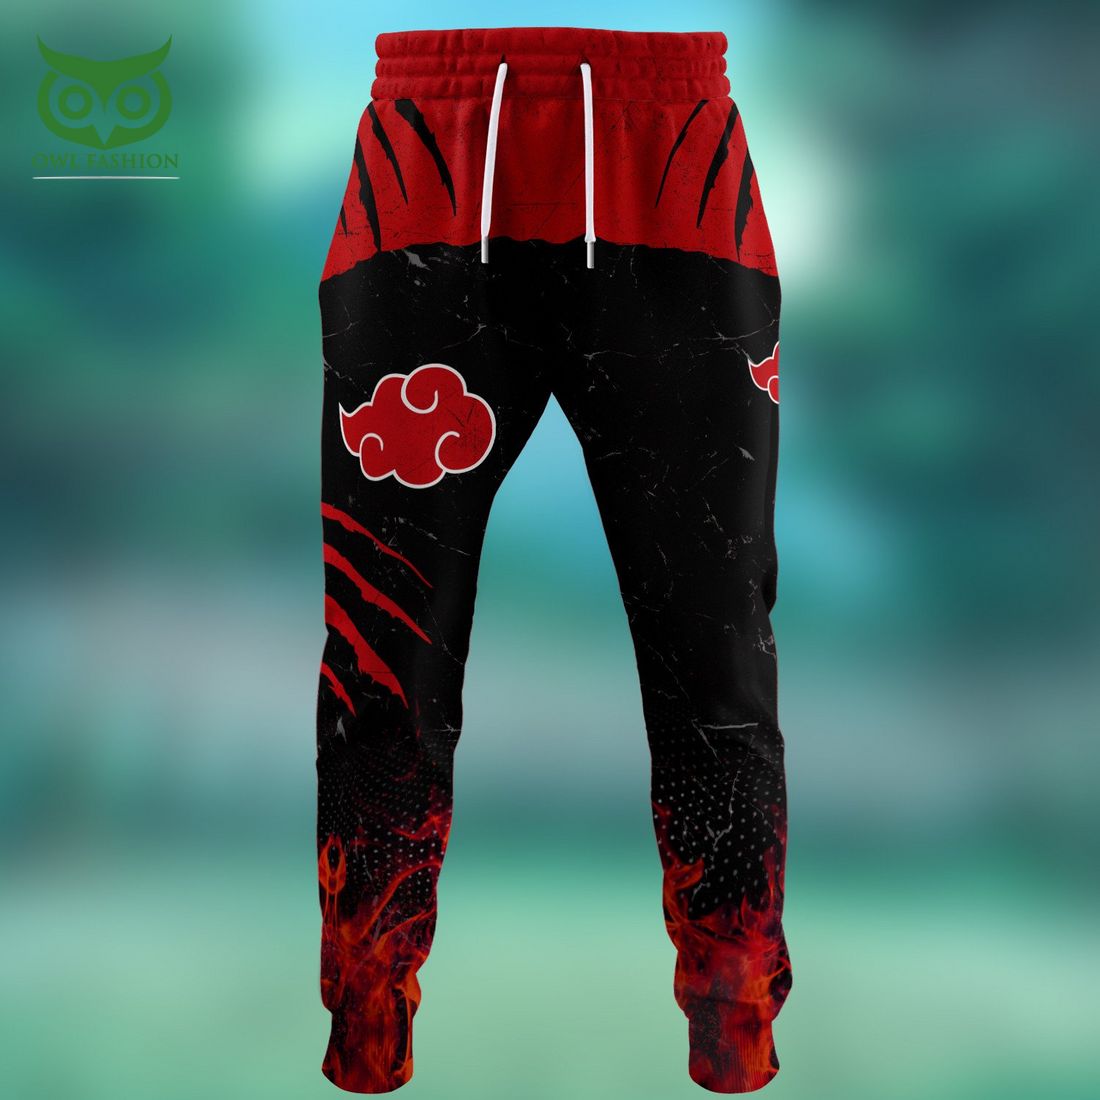 naruto anime red and black 3d sweatpants 1 1ayFR